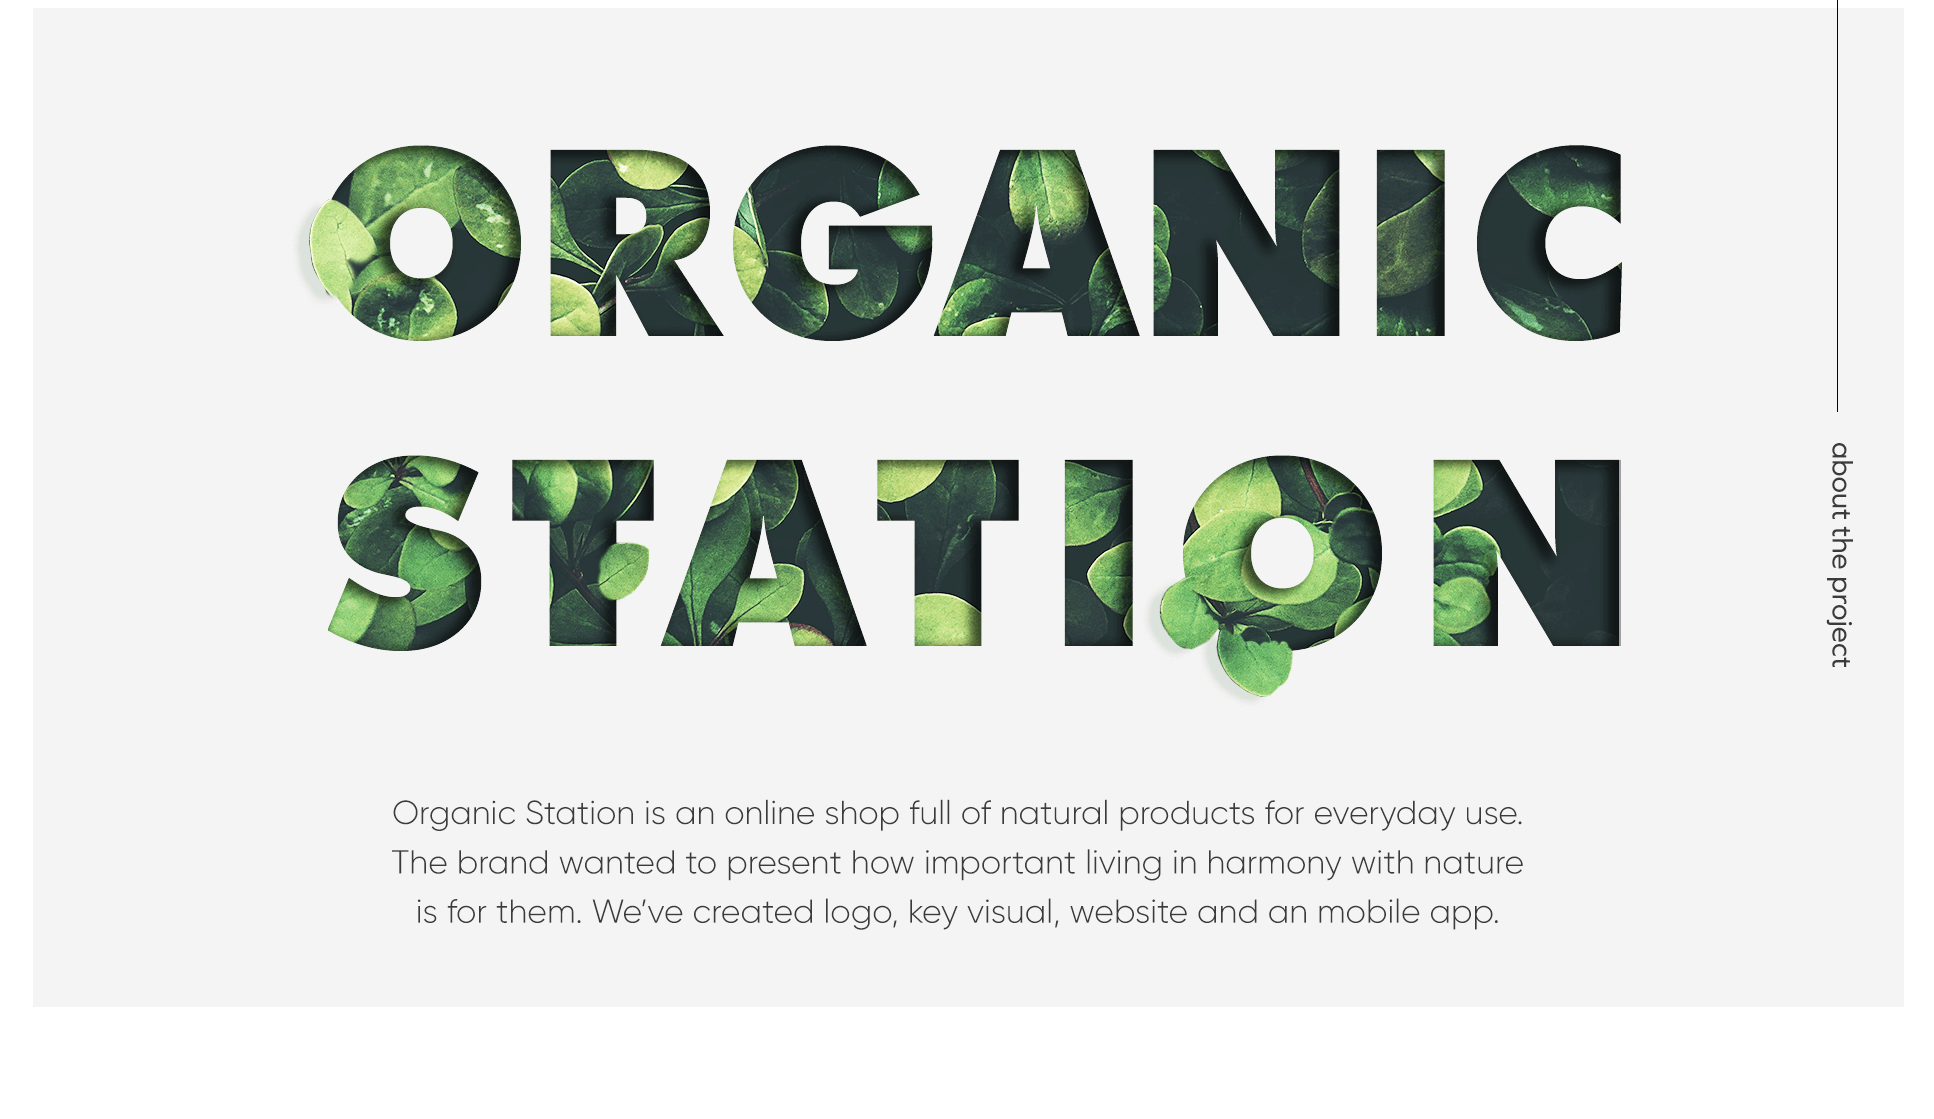 Organic Station logo and initial information about the project